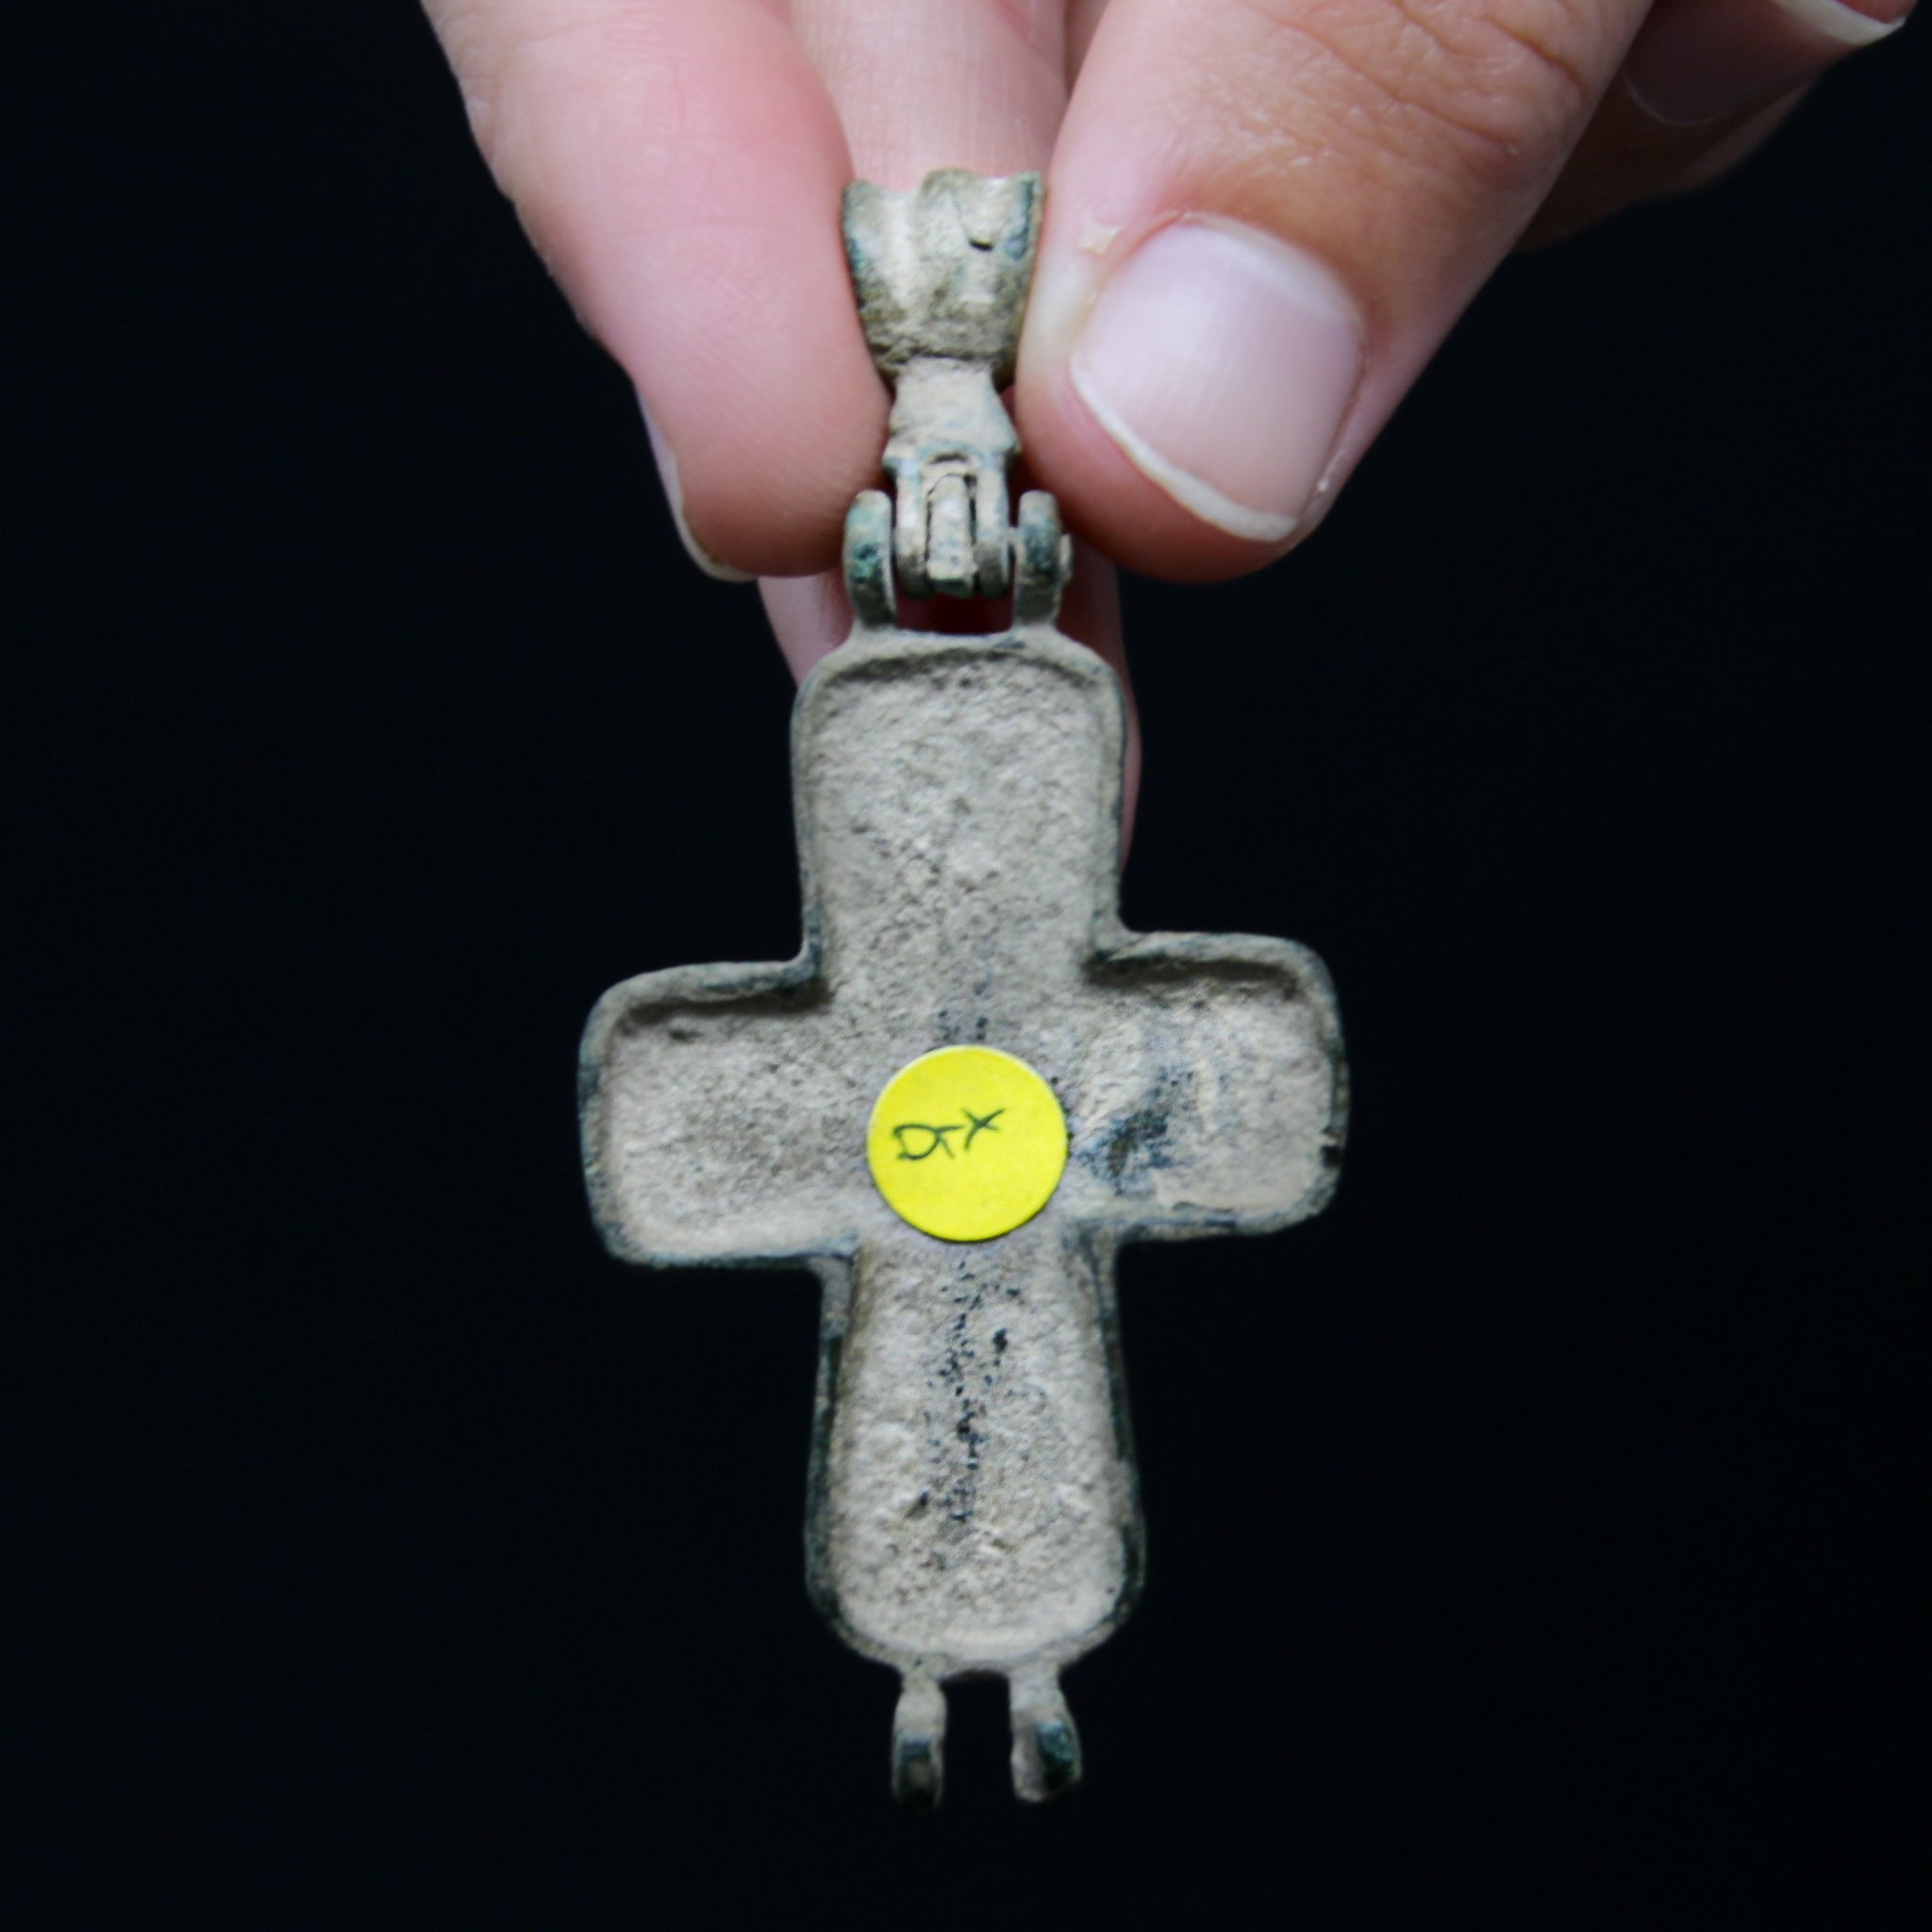 A Byzantine Reliquary Cross with an image of the virgin Mary | Byzantine c. 1200 AD